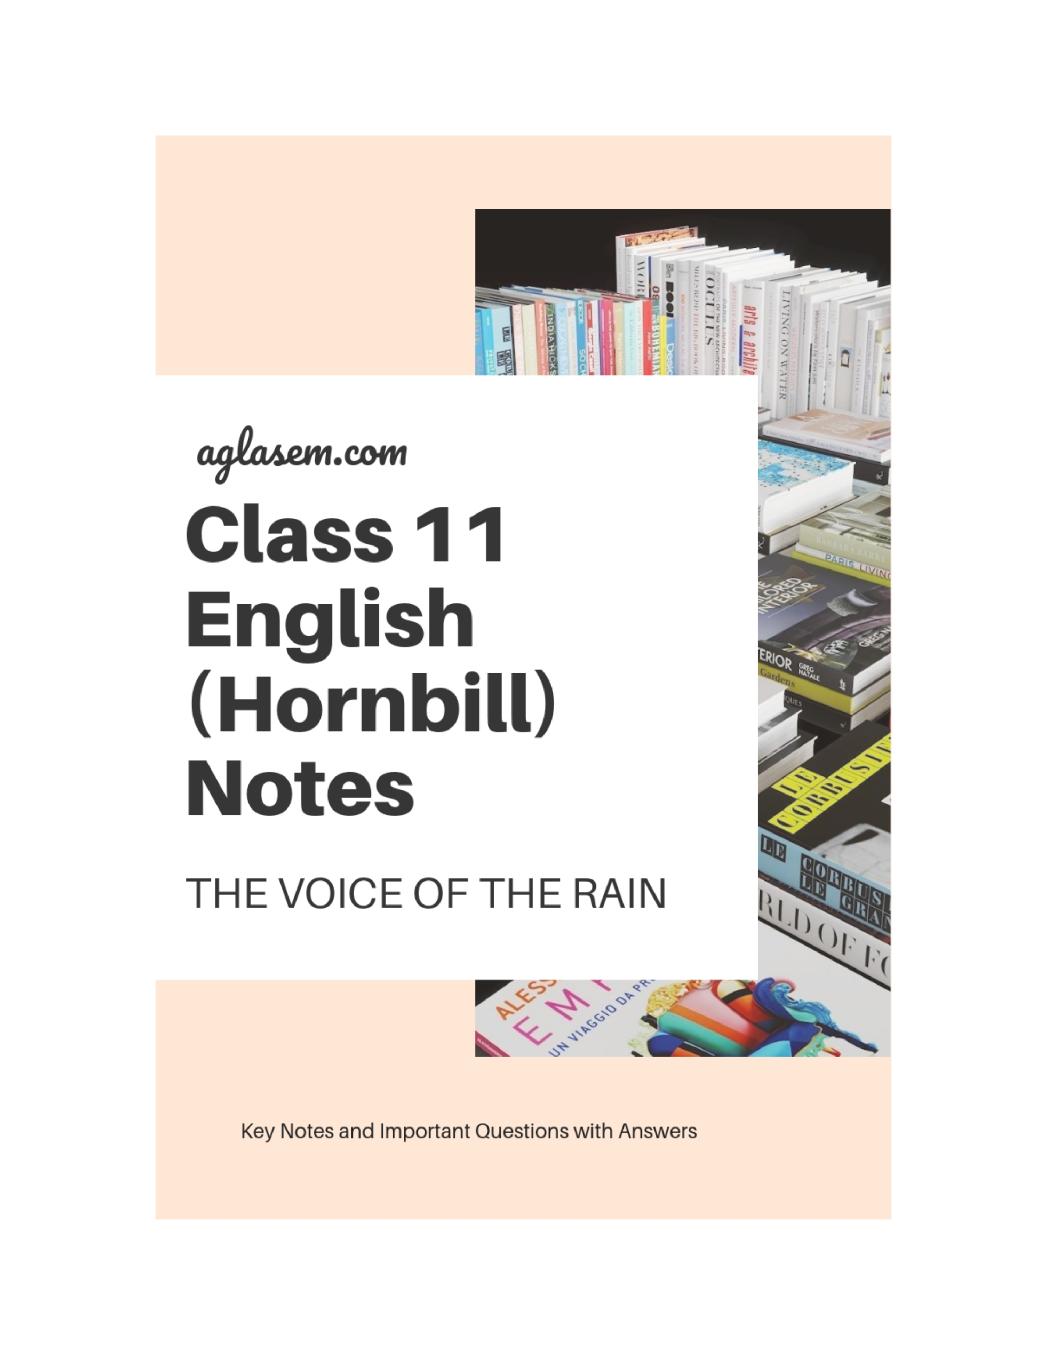 Class 11 English Hornbill Notes For The Voice of the Rain - Page 1